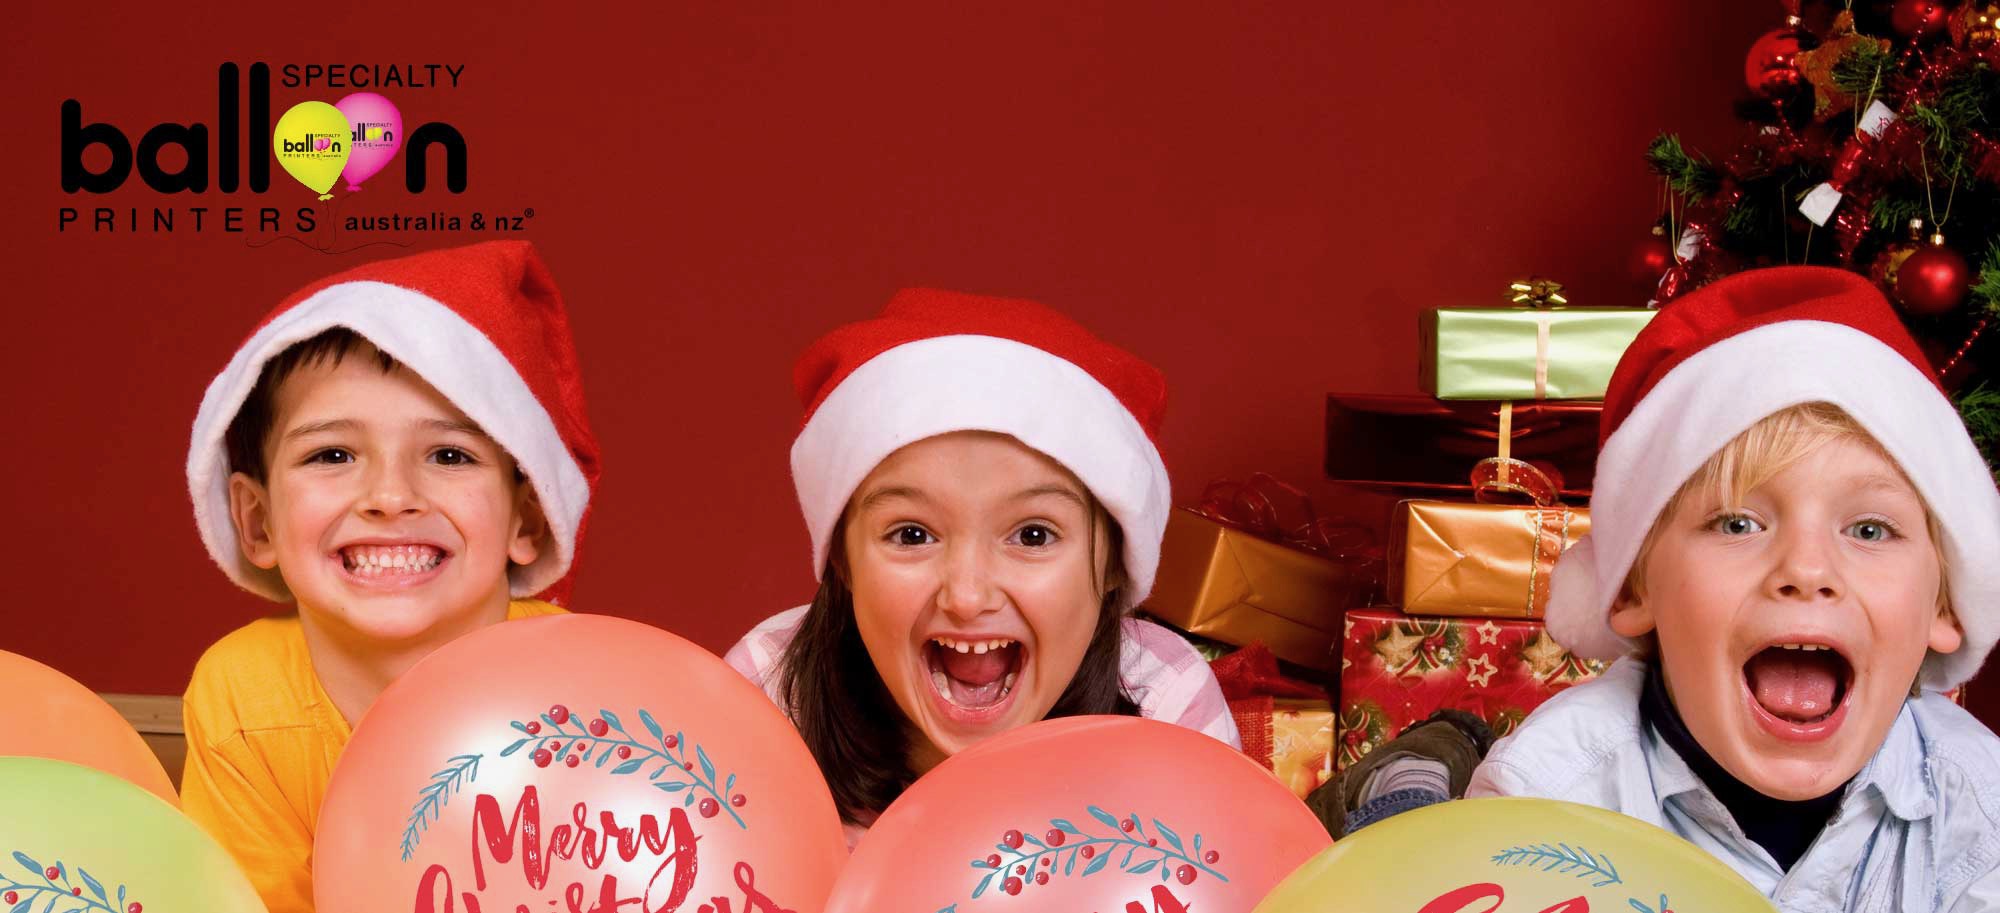 Specialty Balloon Printers The Top 25 Christmas Decoration Ideas That Will Make Santa Proud